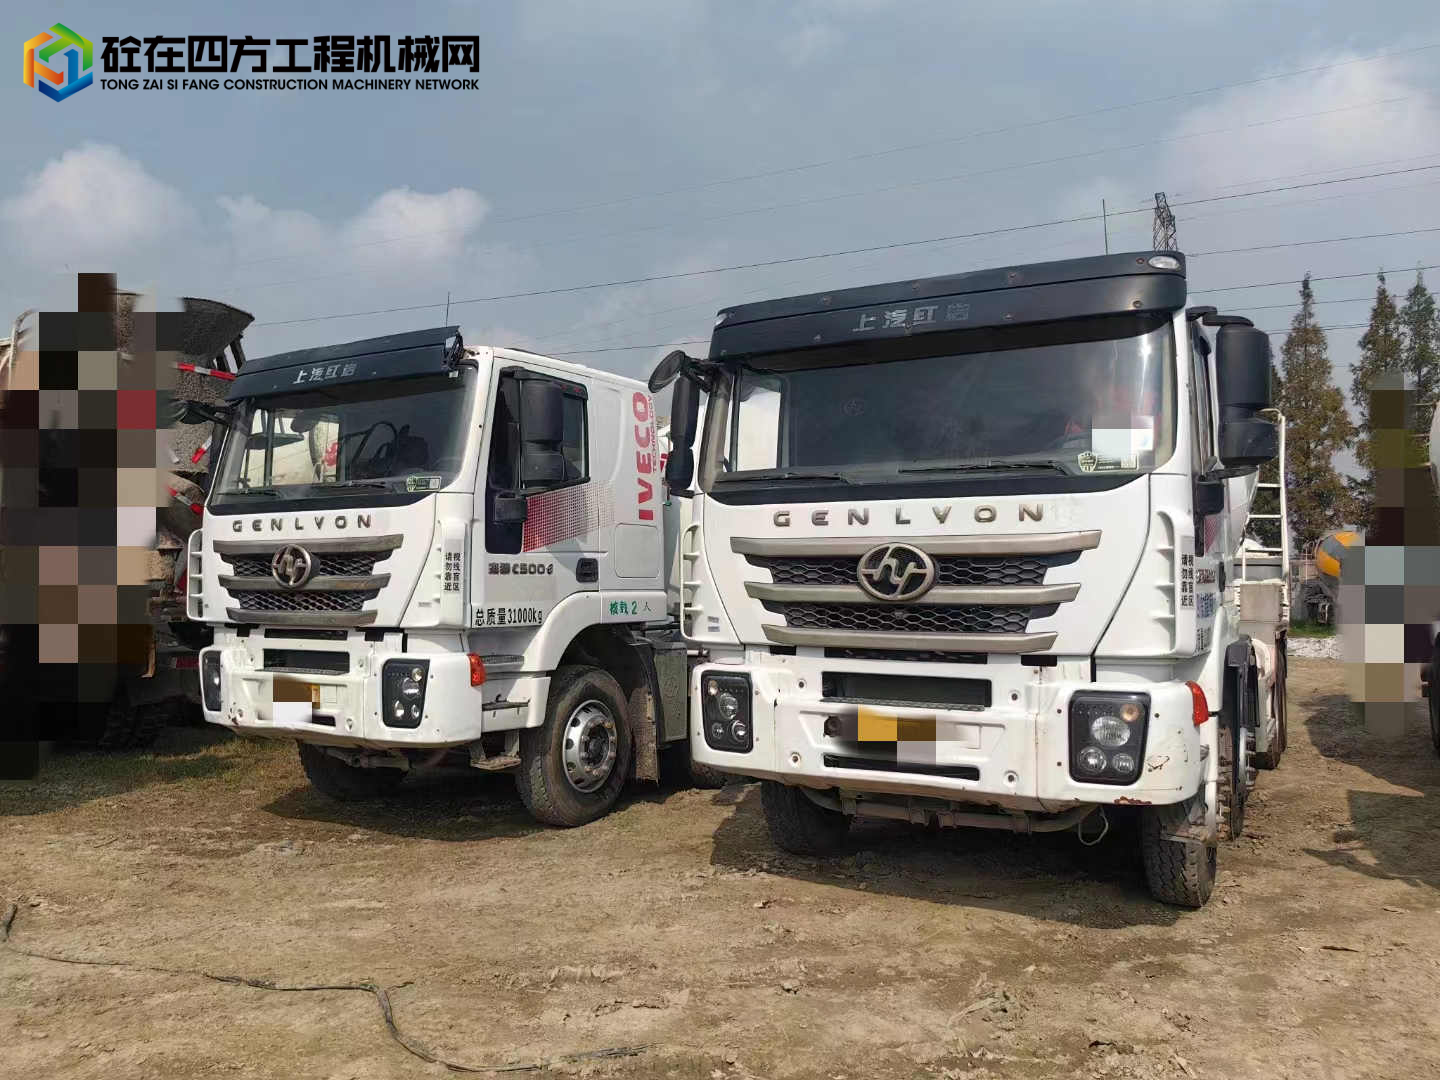 https://images.tongzsf.com/tong/truck_machine/20231106/1654882afd1a72.jpg